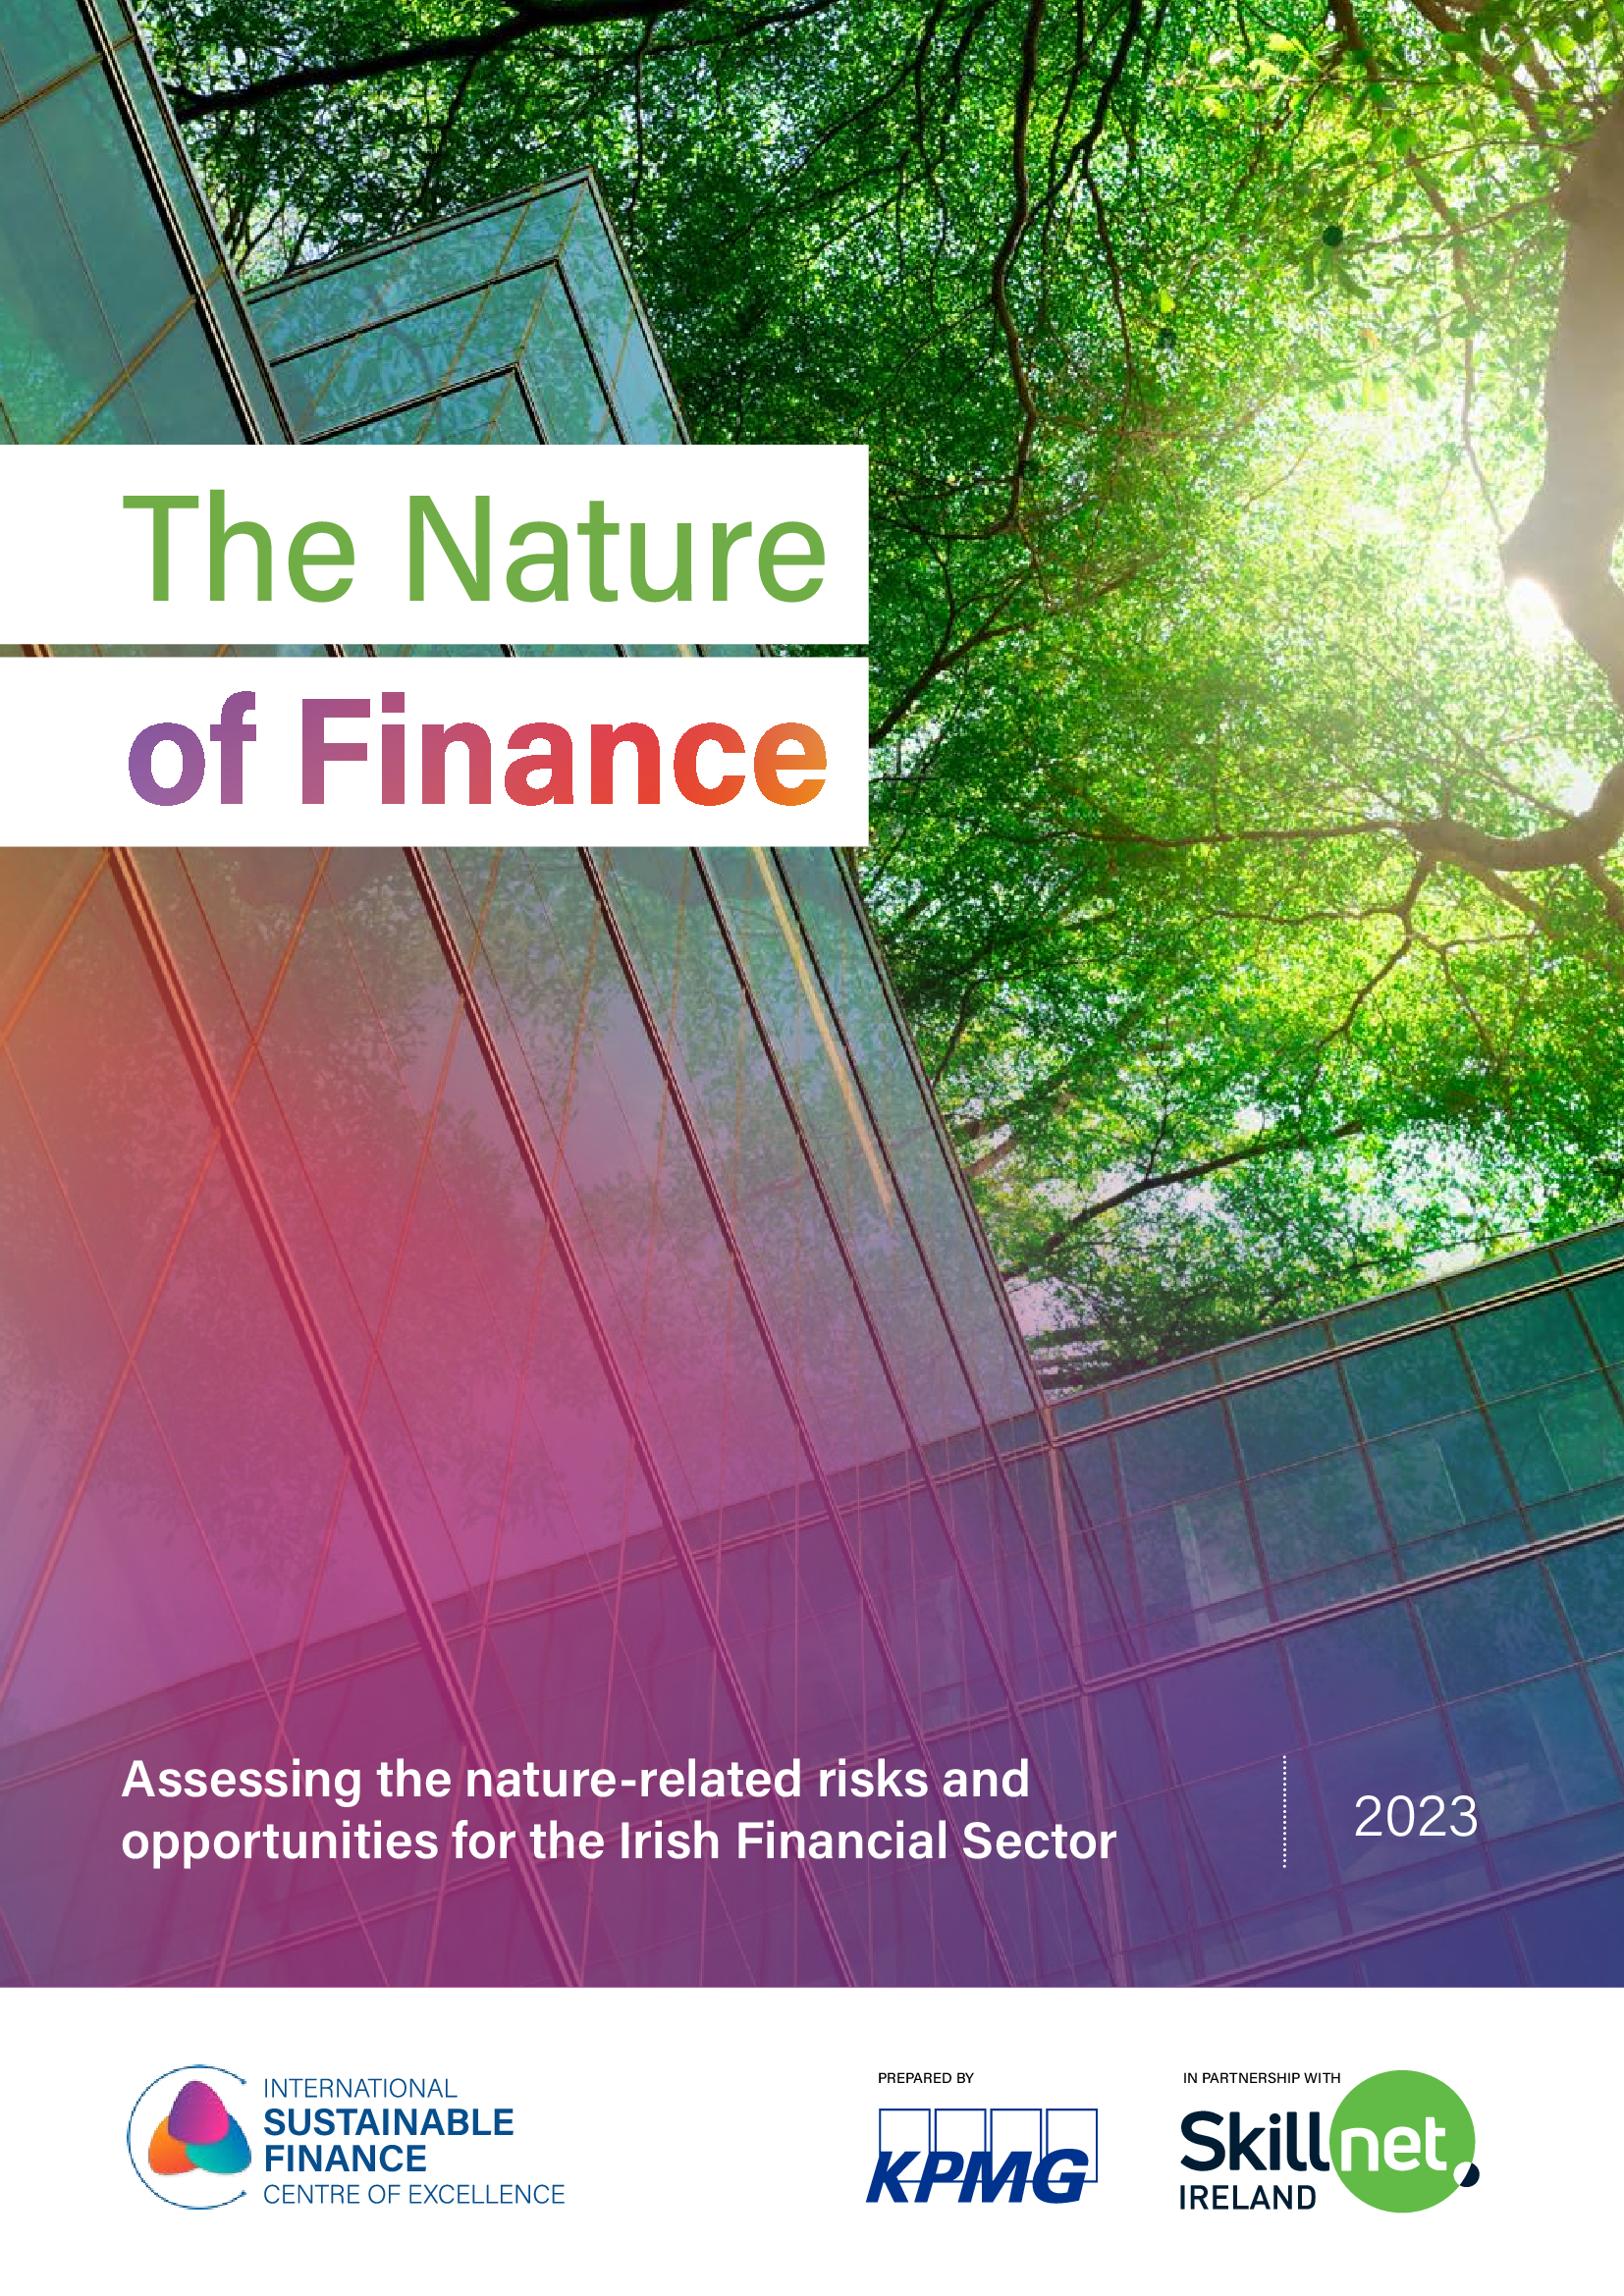 The Nature of Finance